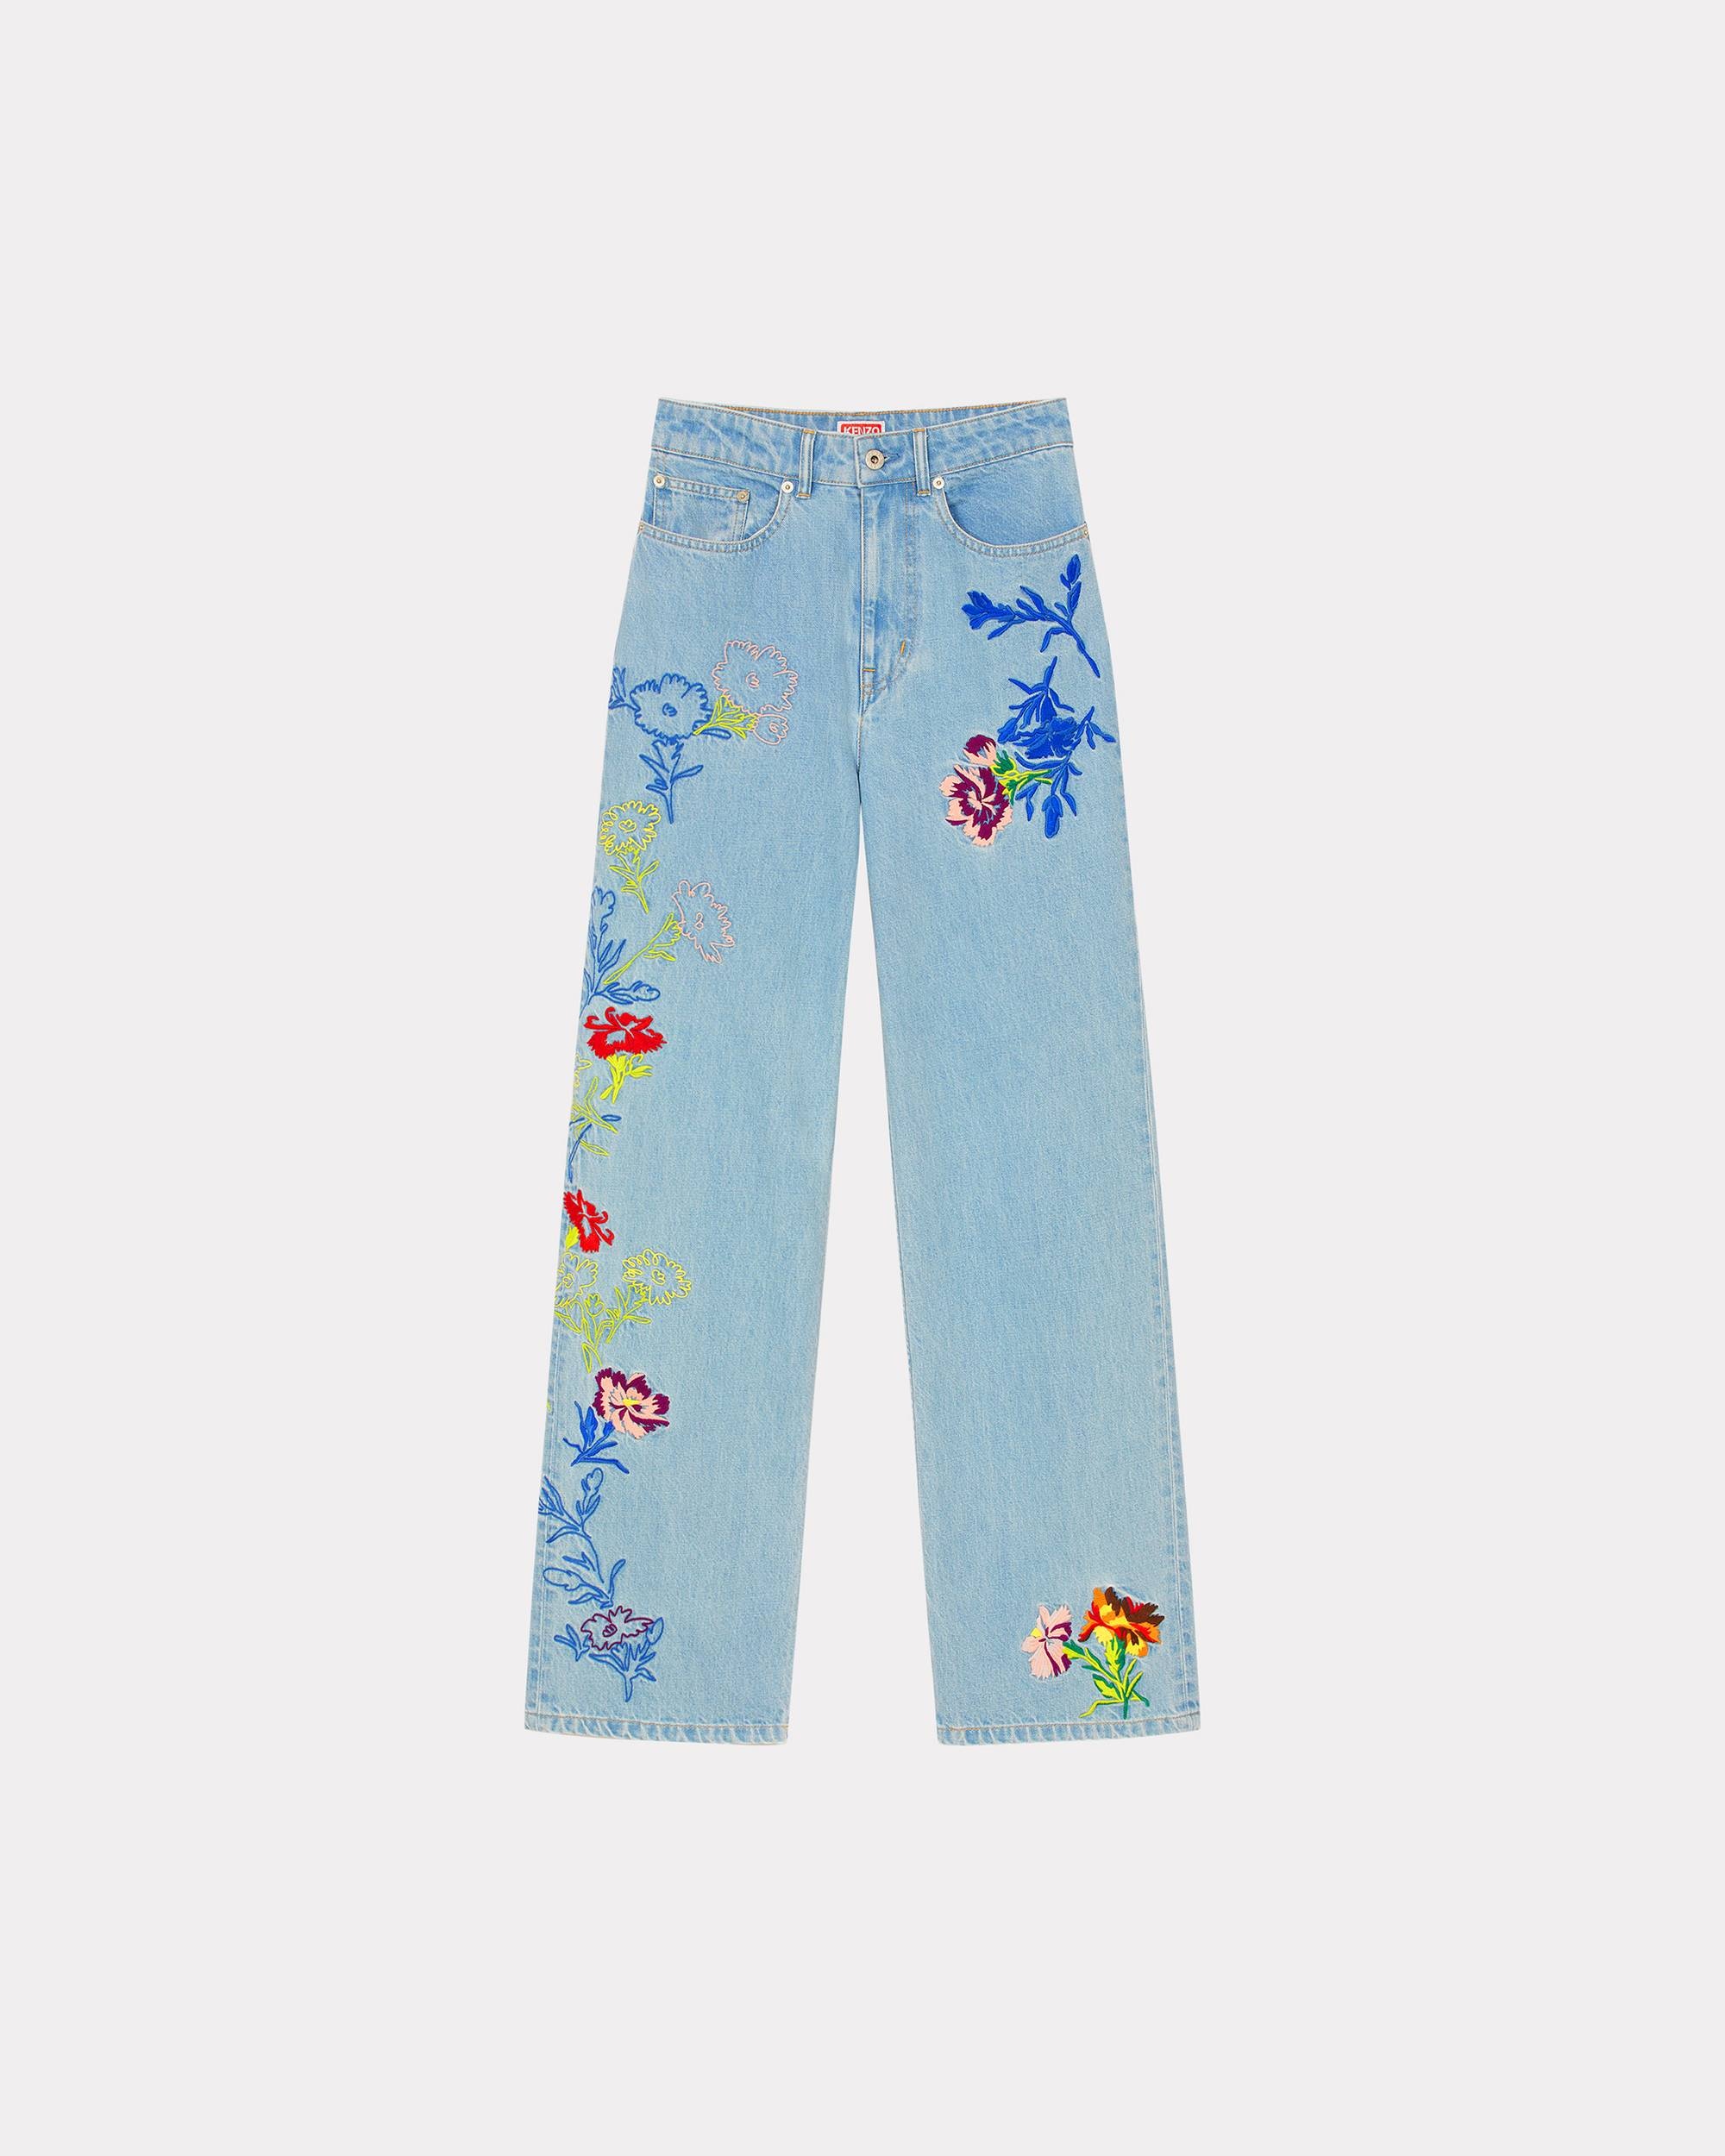 'KENZO Drawn Flowers' AYAME embroidered jeans - 1